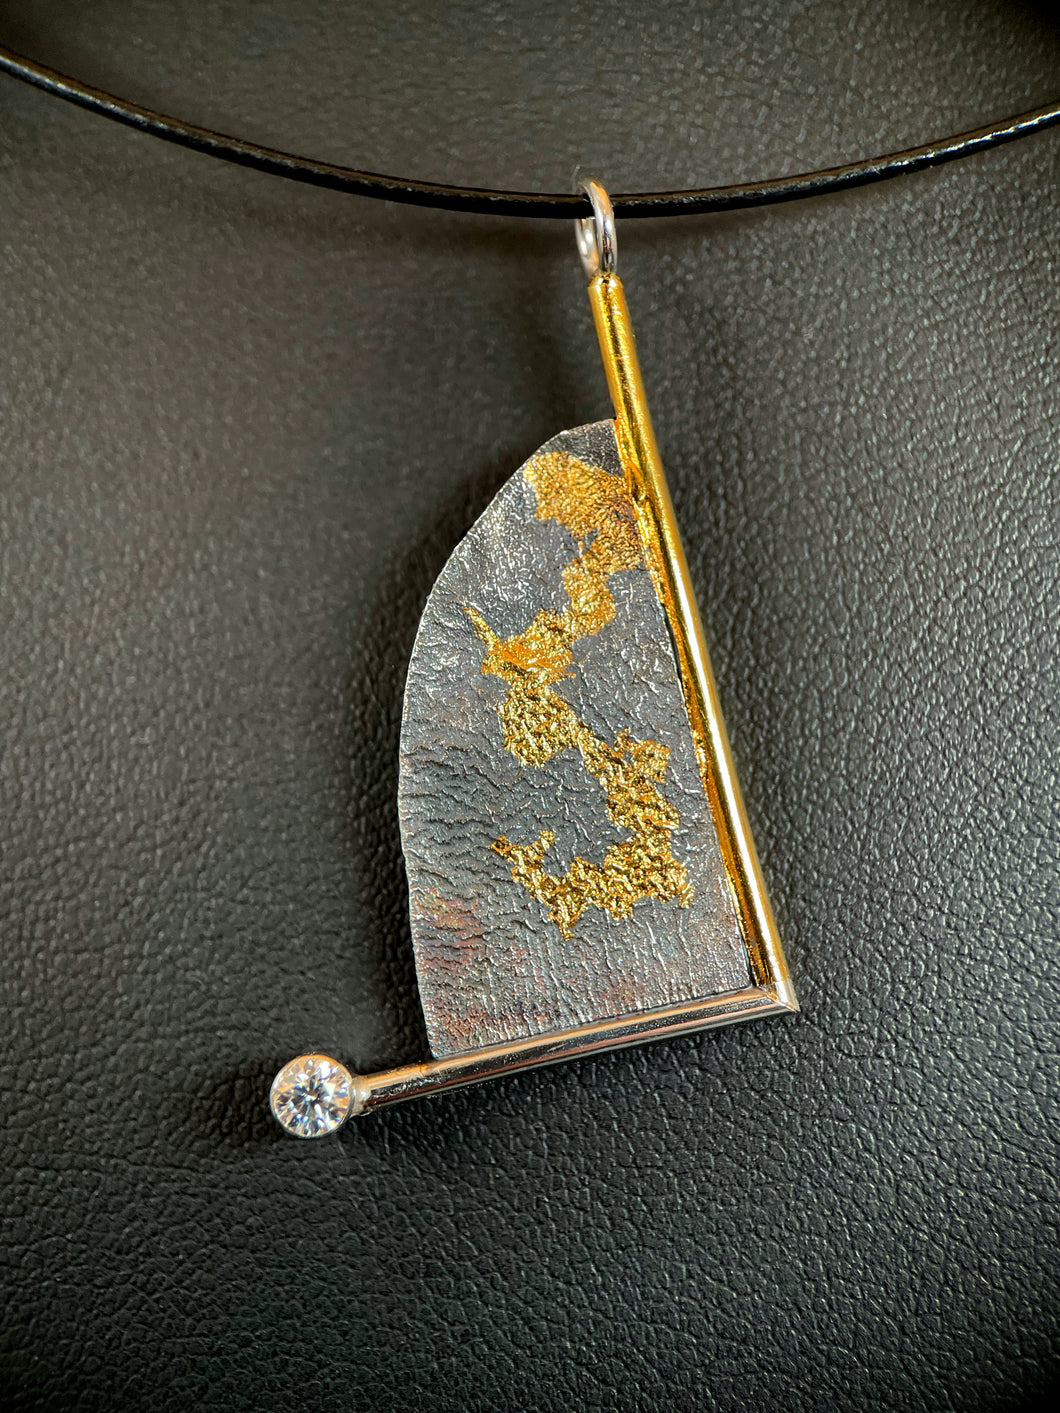 A triangular necklace, hanging at an angle. The silver has a terrain-like pattern, and is bordered on the right and bottom with wire - gold on the right, silver on the bottom. The silver wire terminates in a lab-grown moissanite gem. The third side is a raw, curving edge. There is a branching gold pattern winding its way down the necklace.